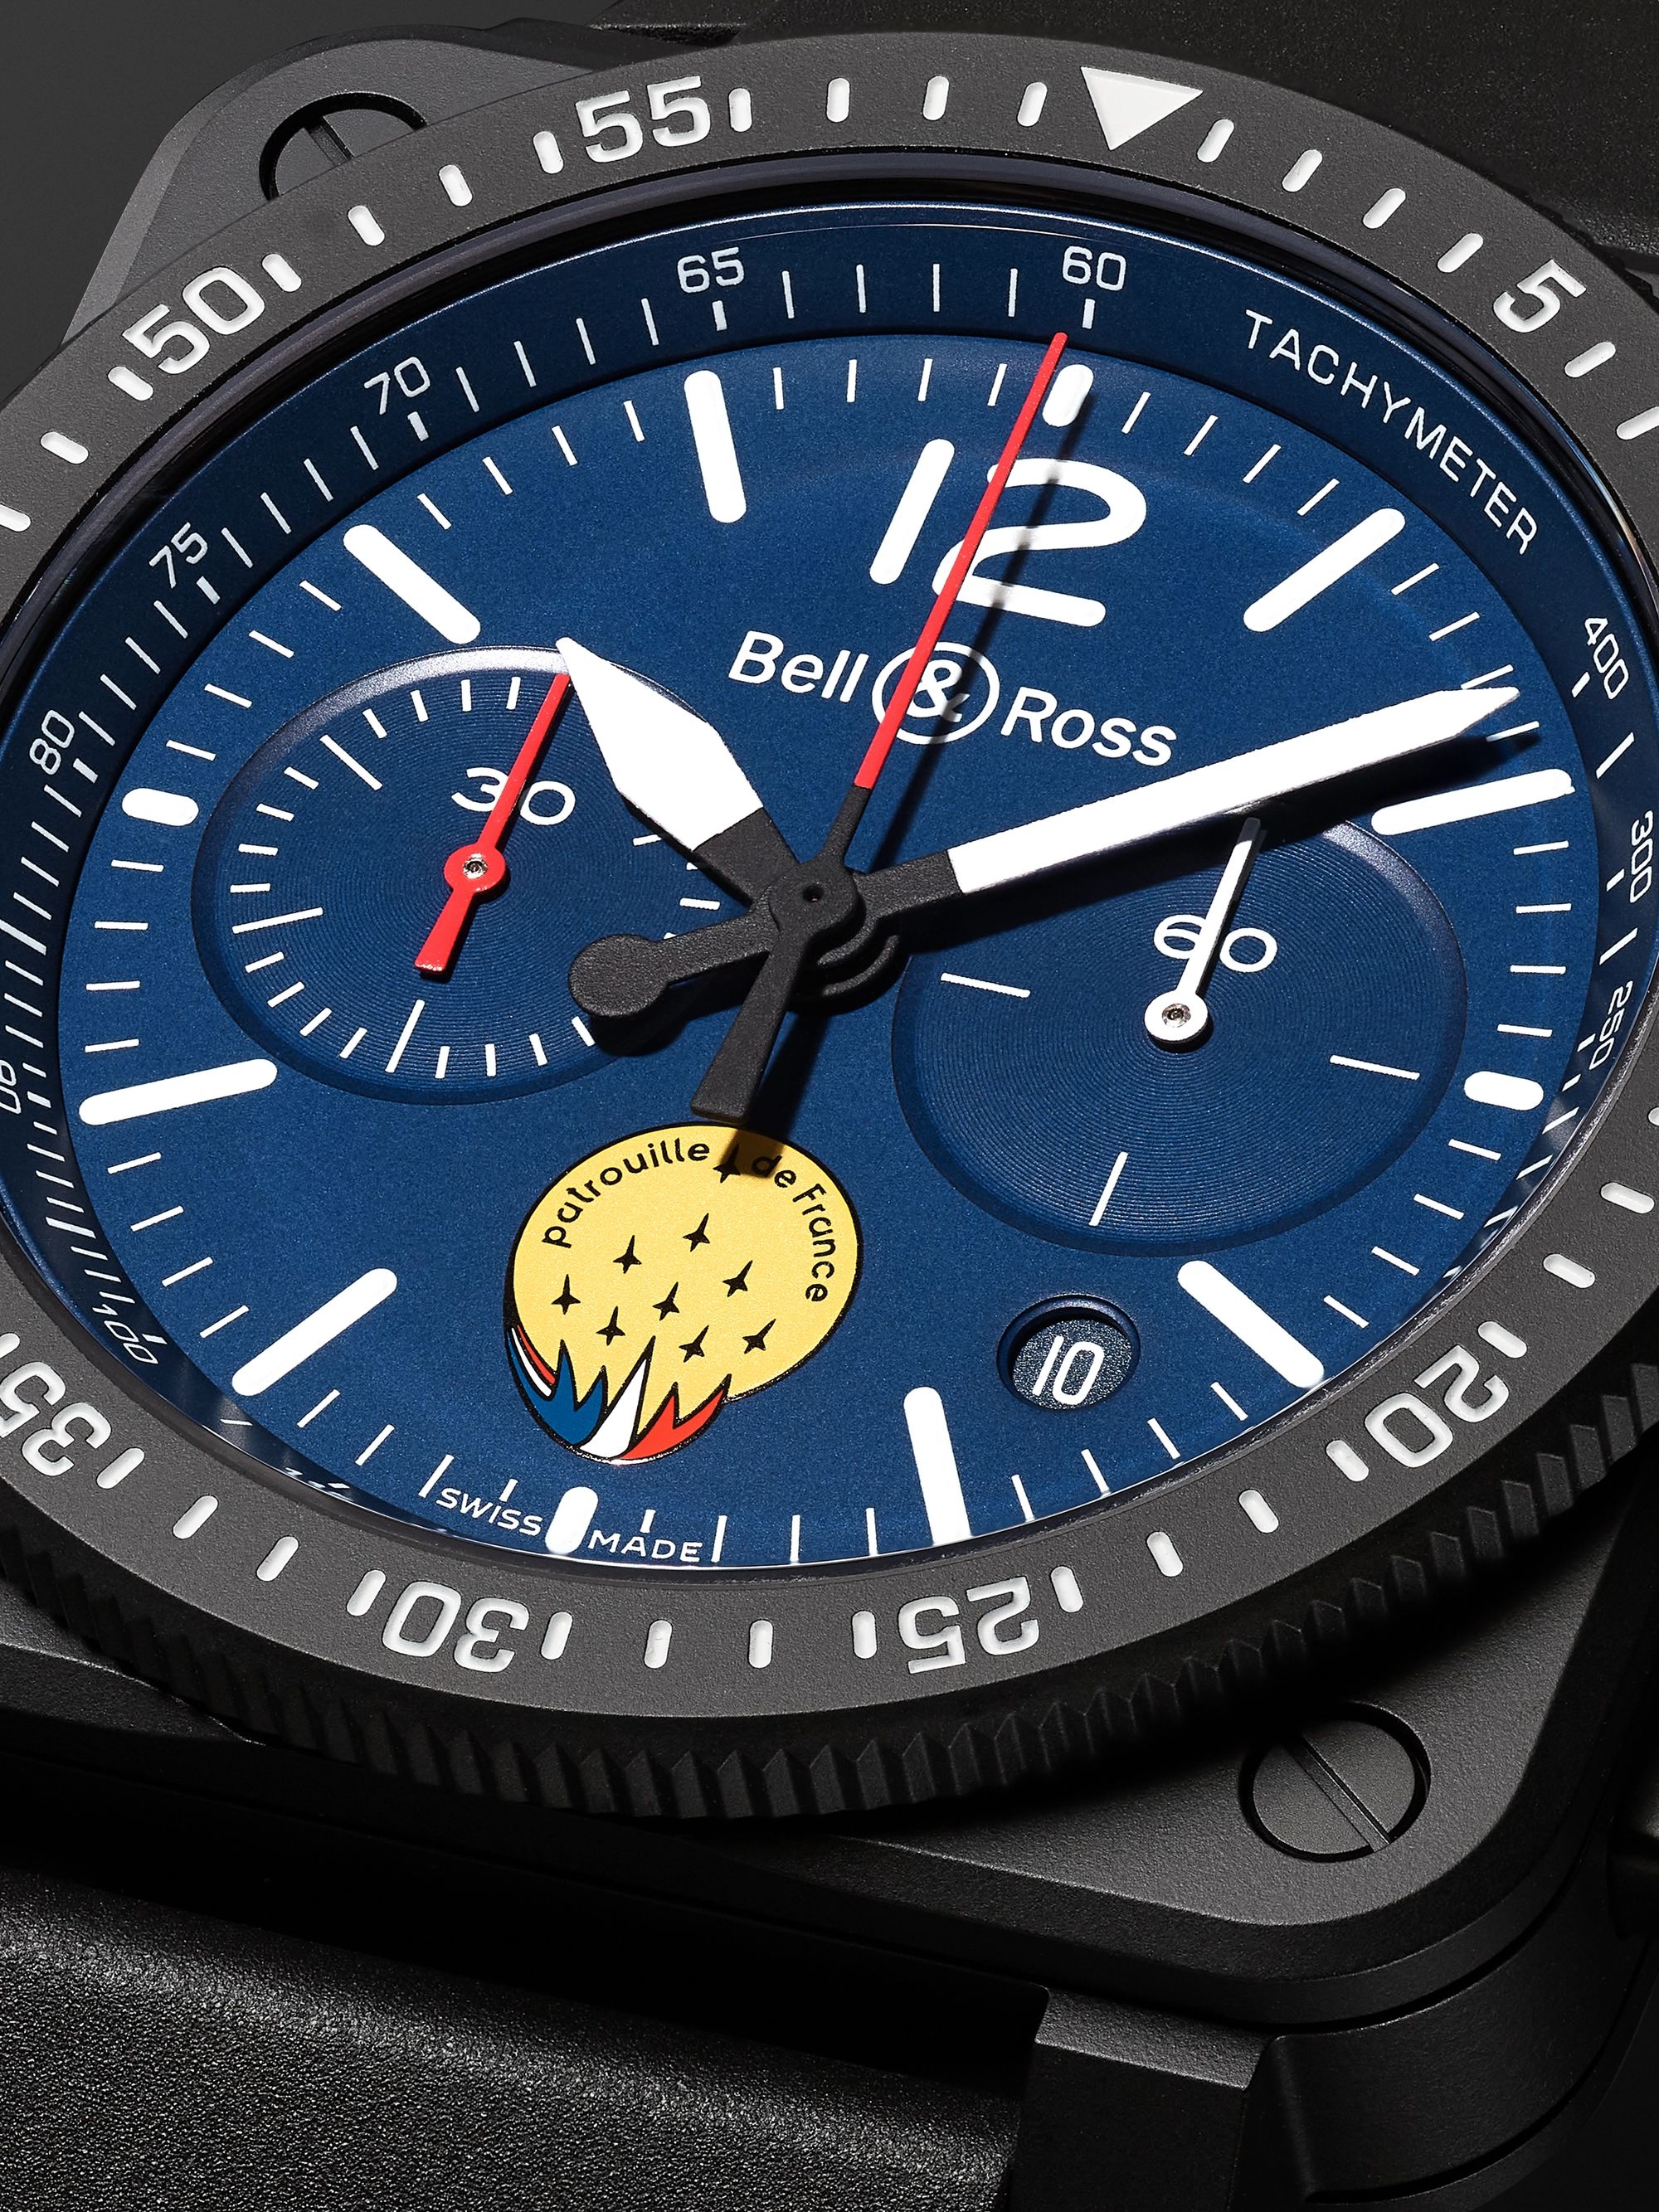 BELL & ROSS BR 03-94 PA94 Patrouille de France Limited Edition Chronograph Ceramic and Rubber Watch, Ref. No. BR0394-PAF1-CE/SRB